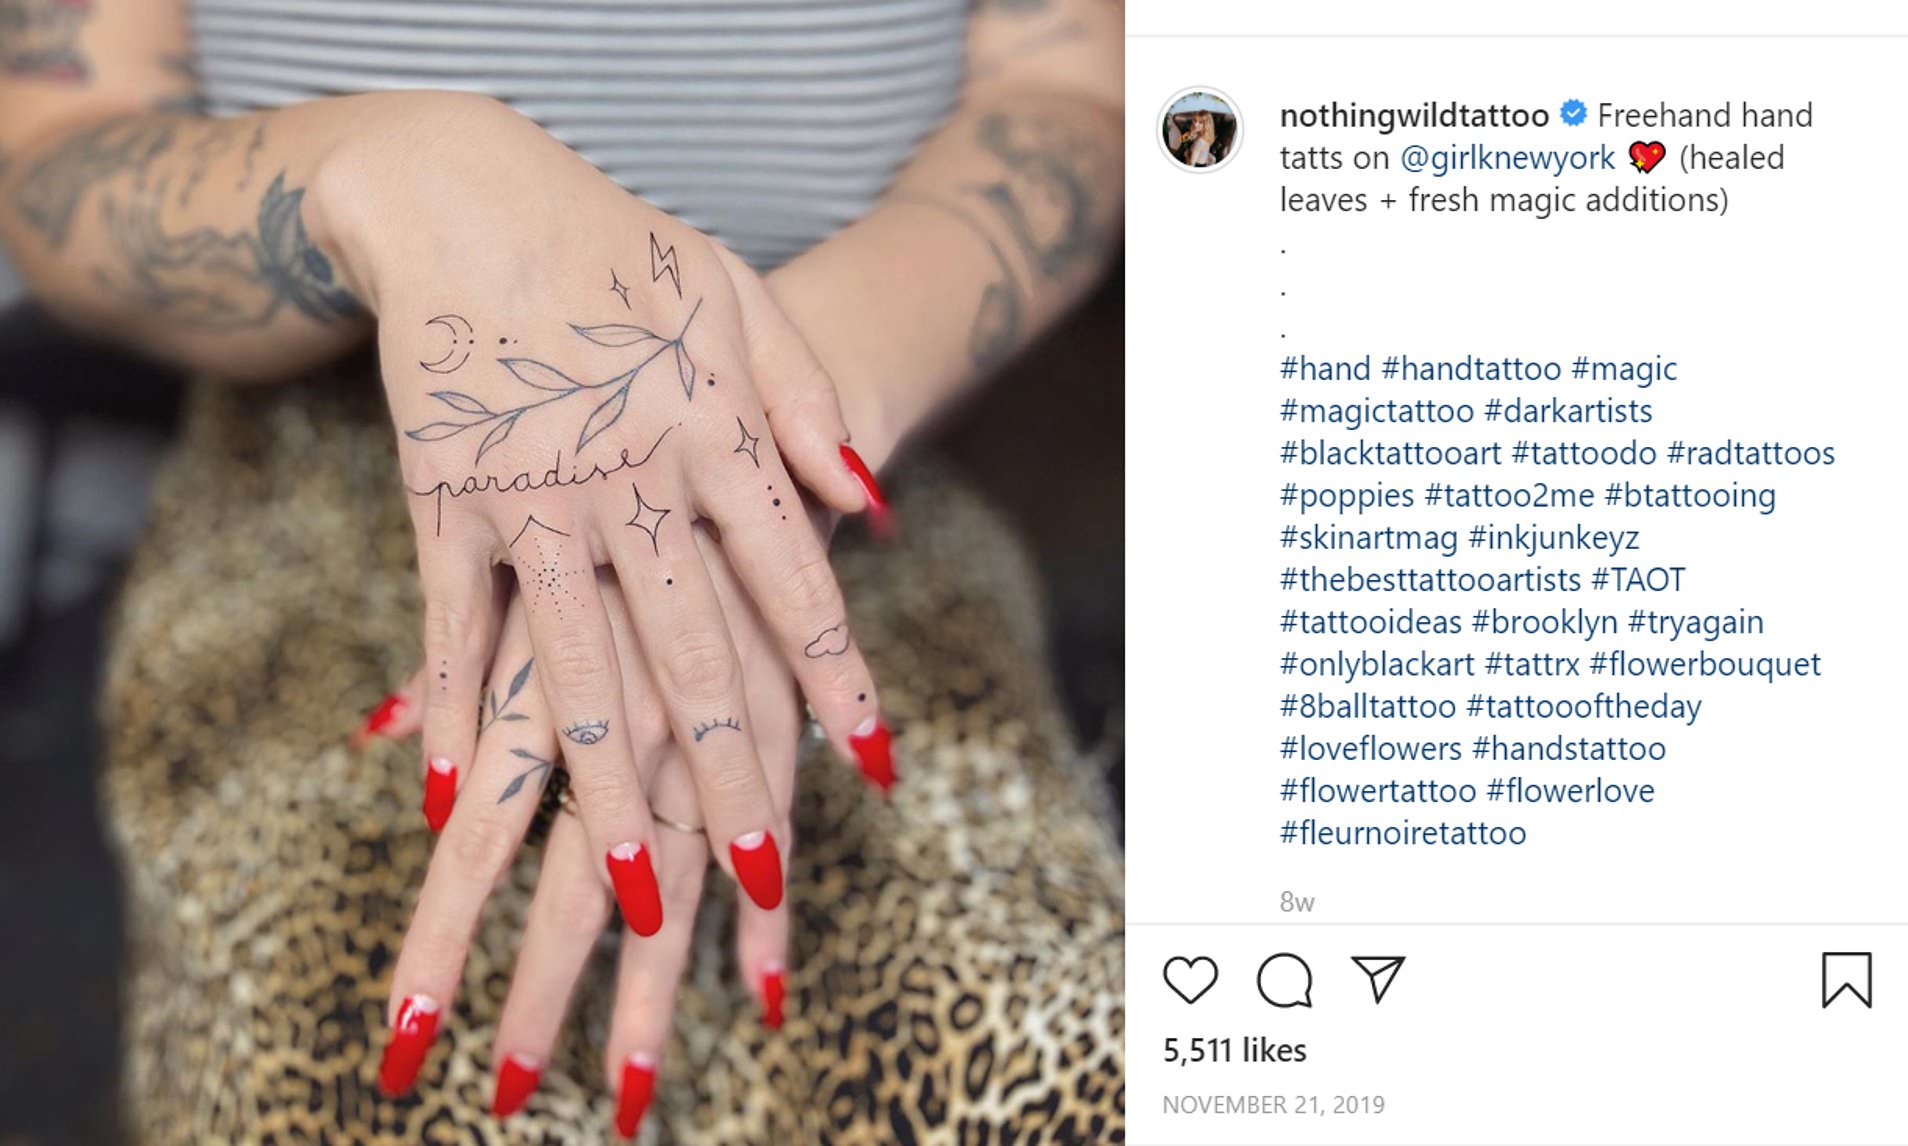 how to message a tattoo artist on instagram